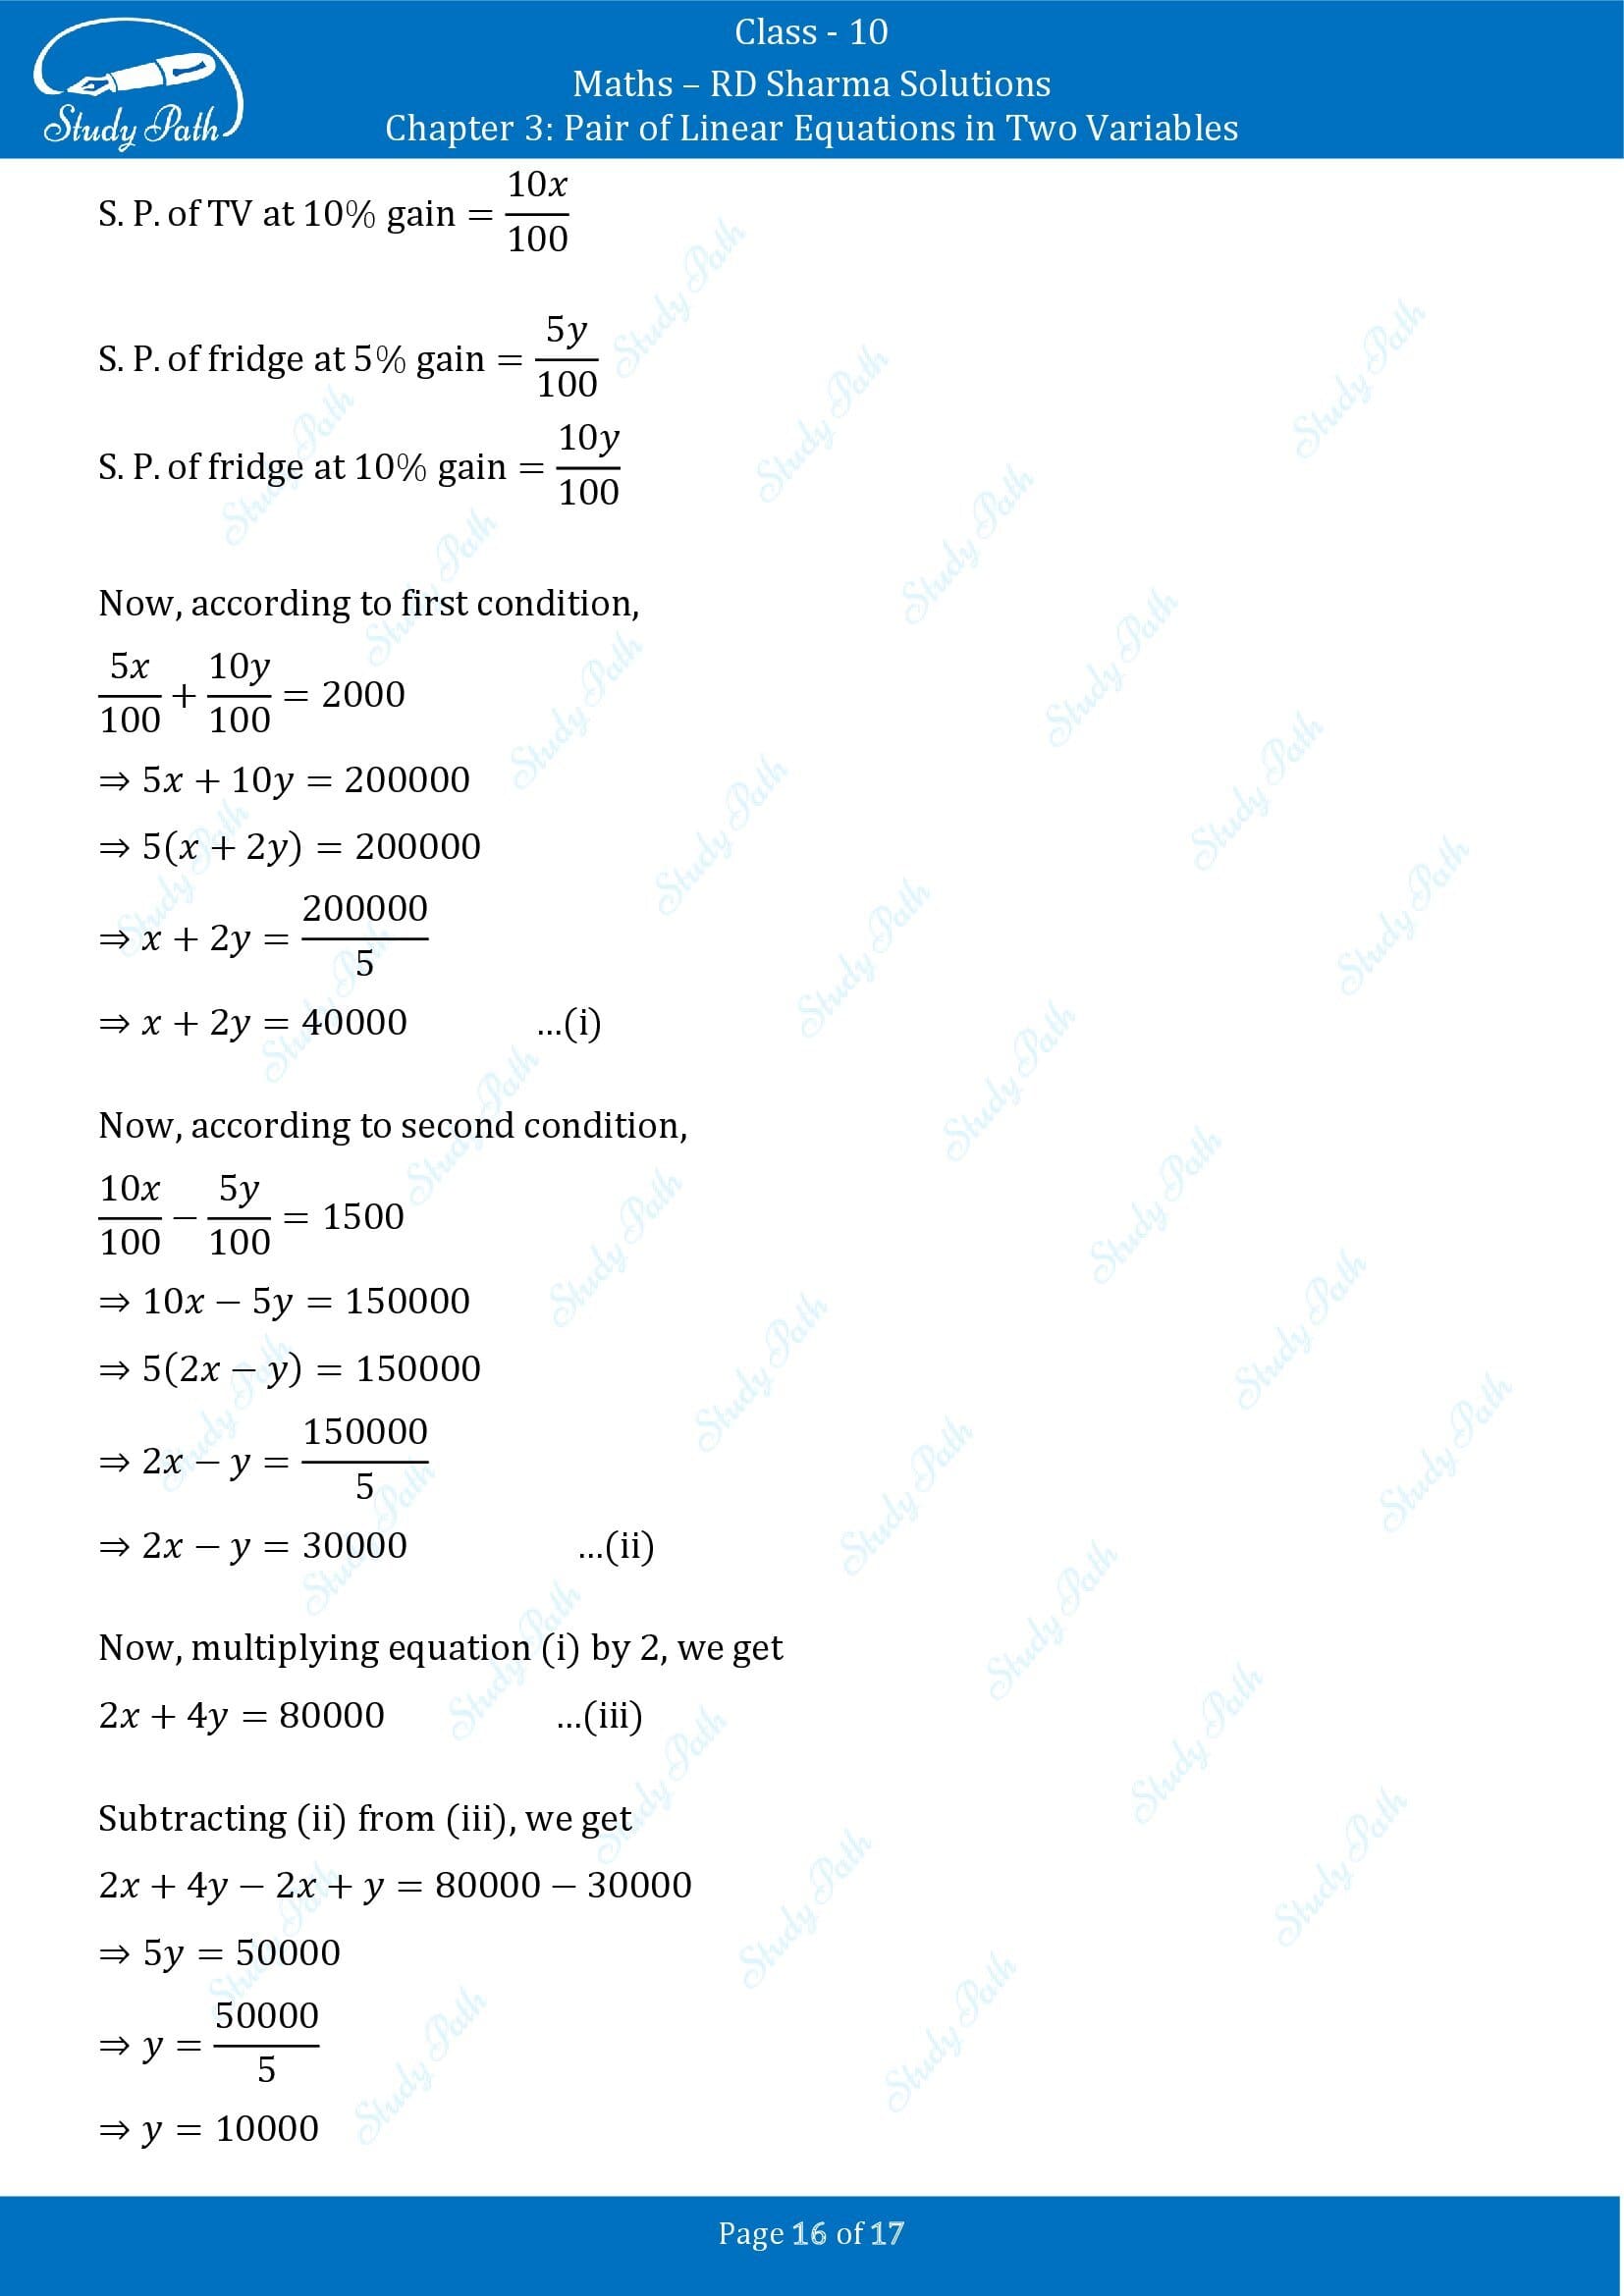 RD Sharma Solutions Class 10 Chapter 3 Pair of Linear Equations in Two Variables Exercise 3.6 00016